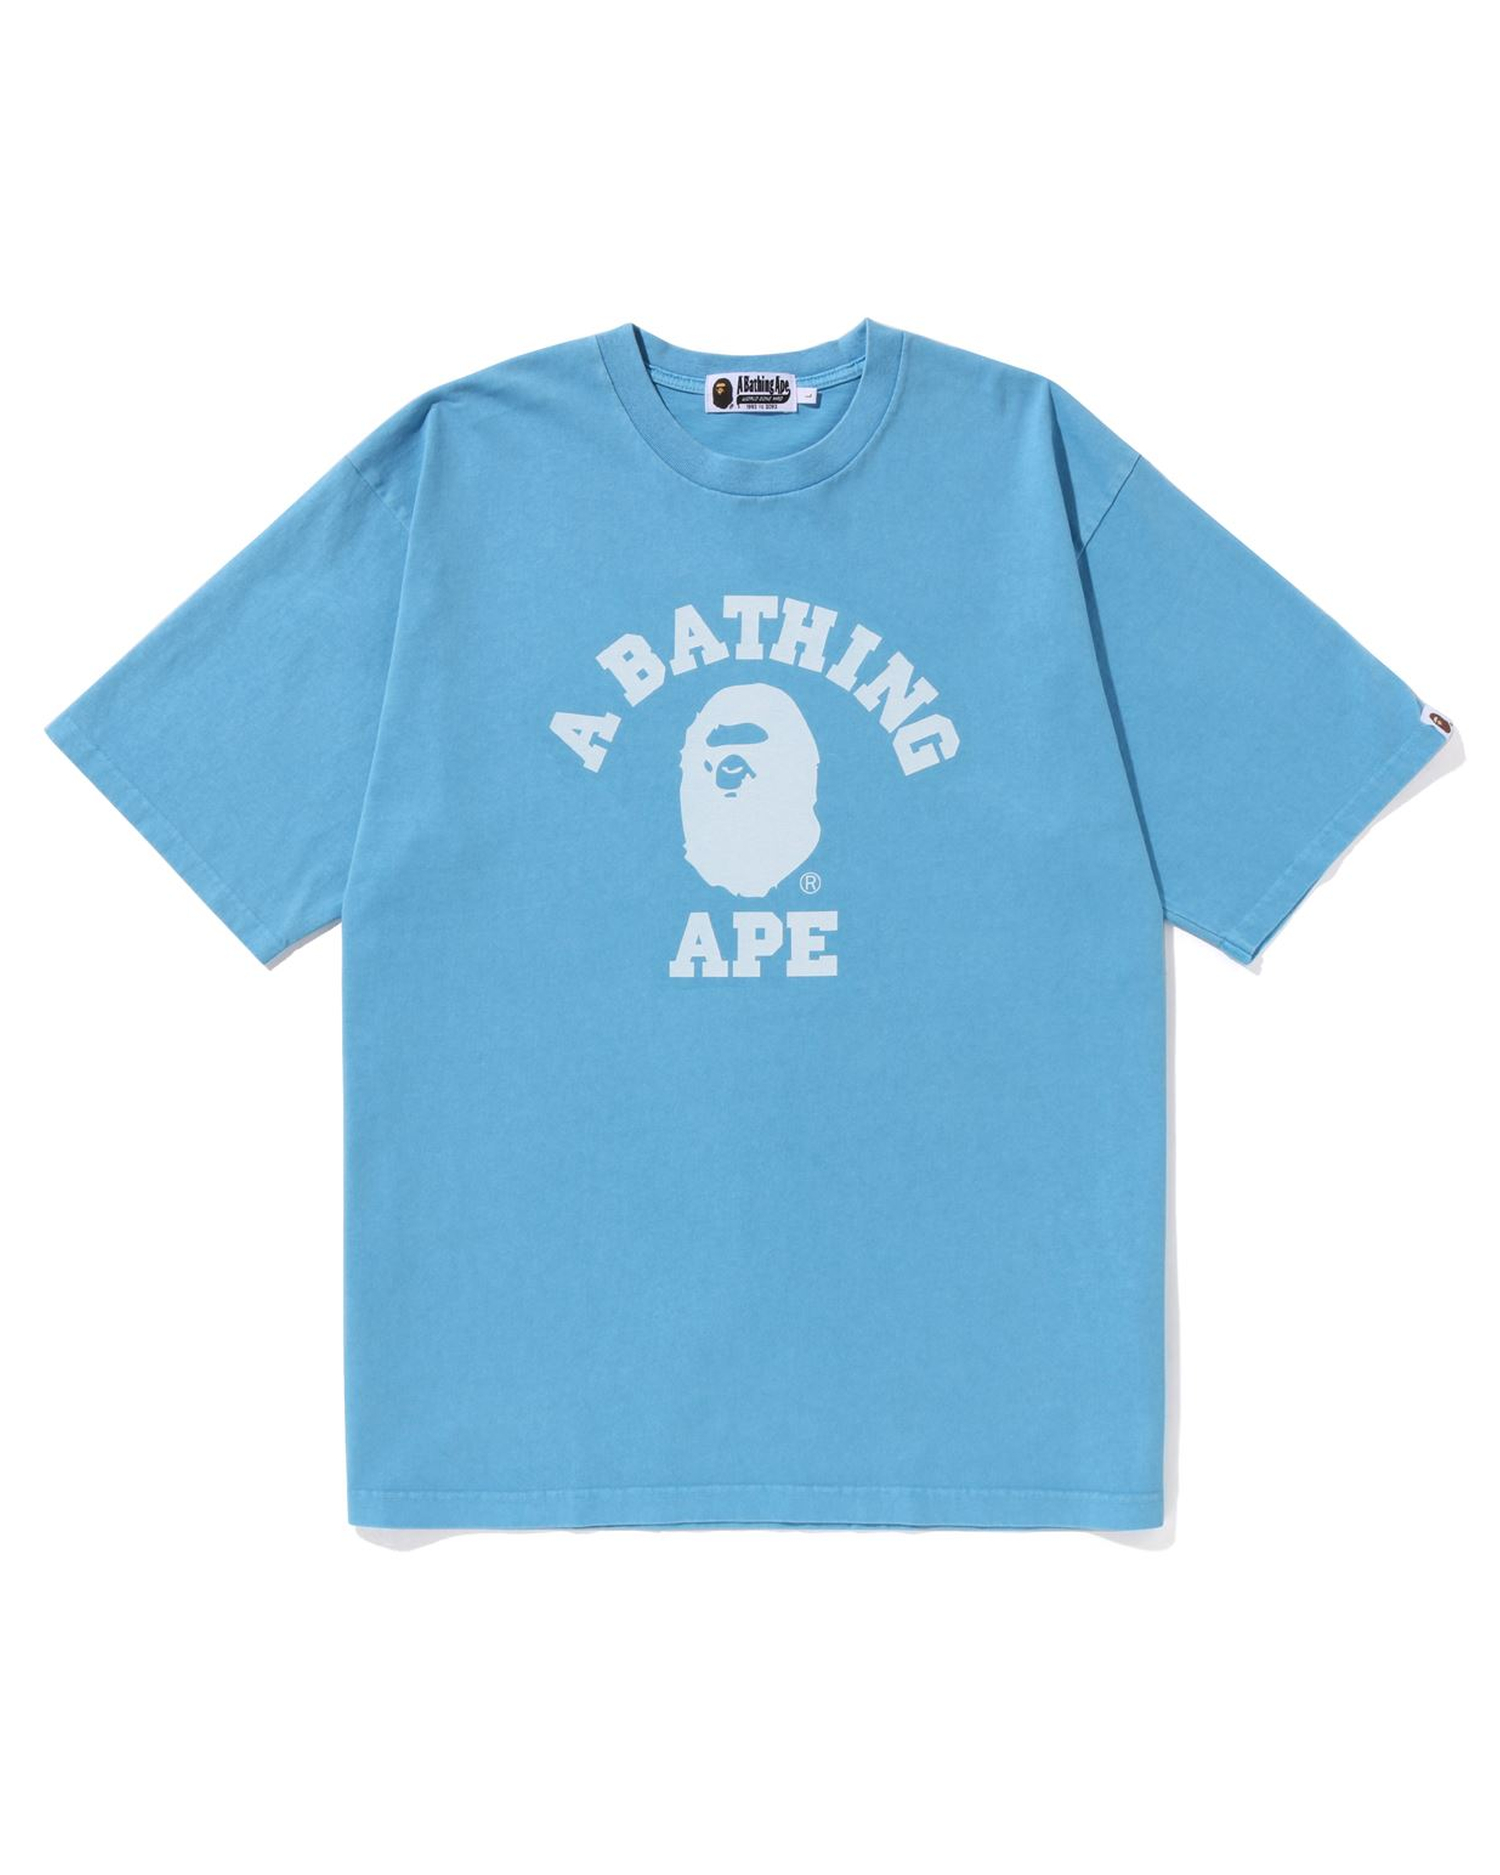 A BATHING APE® Pigment Dyed College Relaxed Fit Tee| ITeSHOP